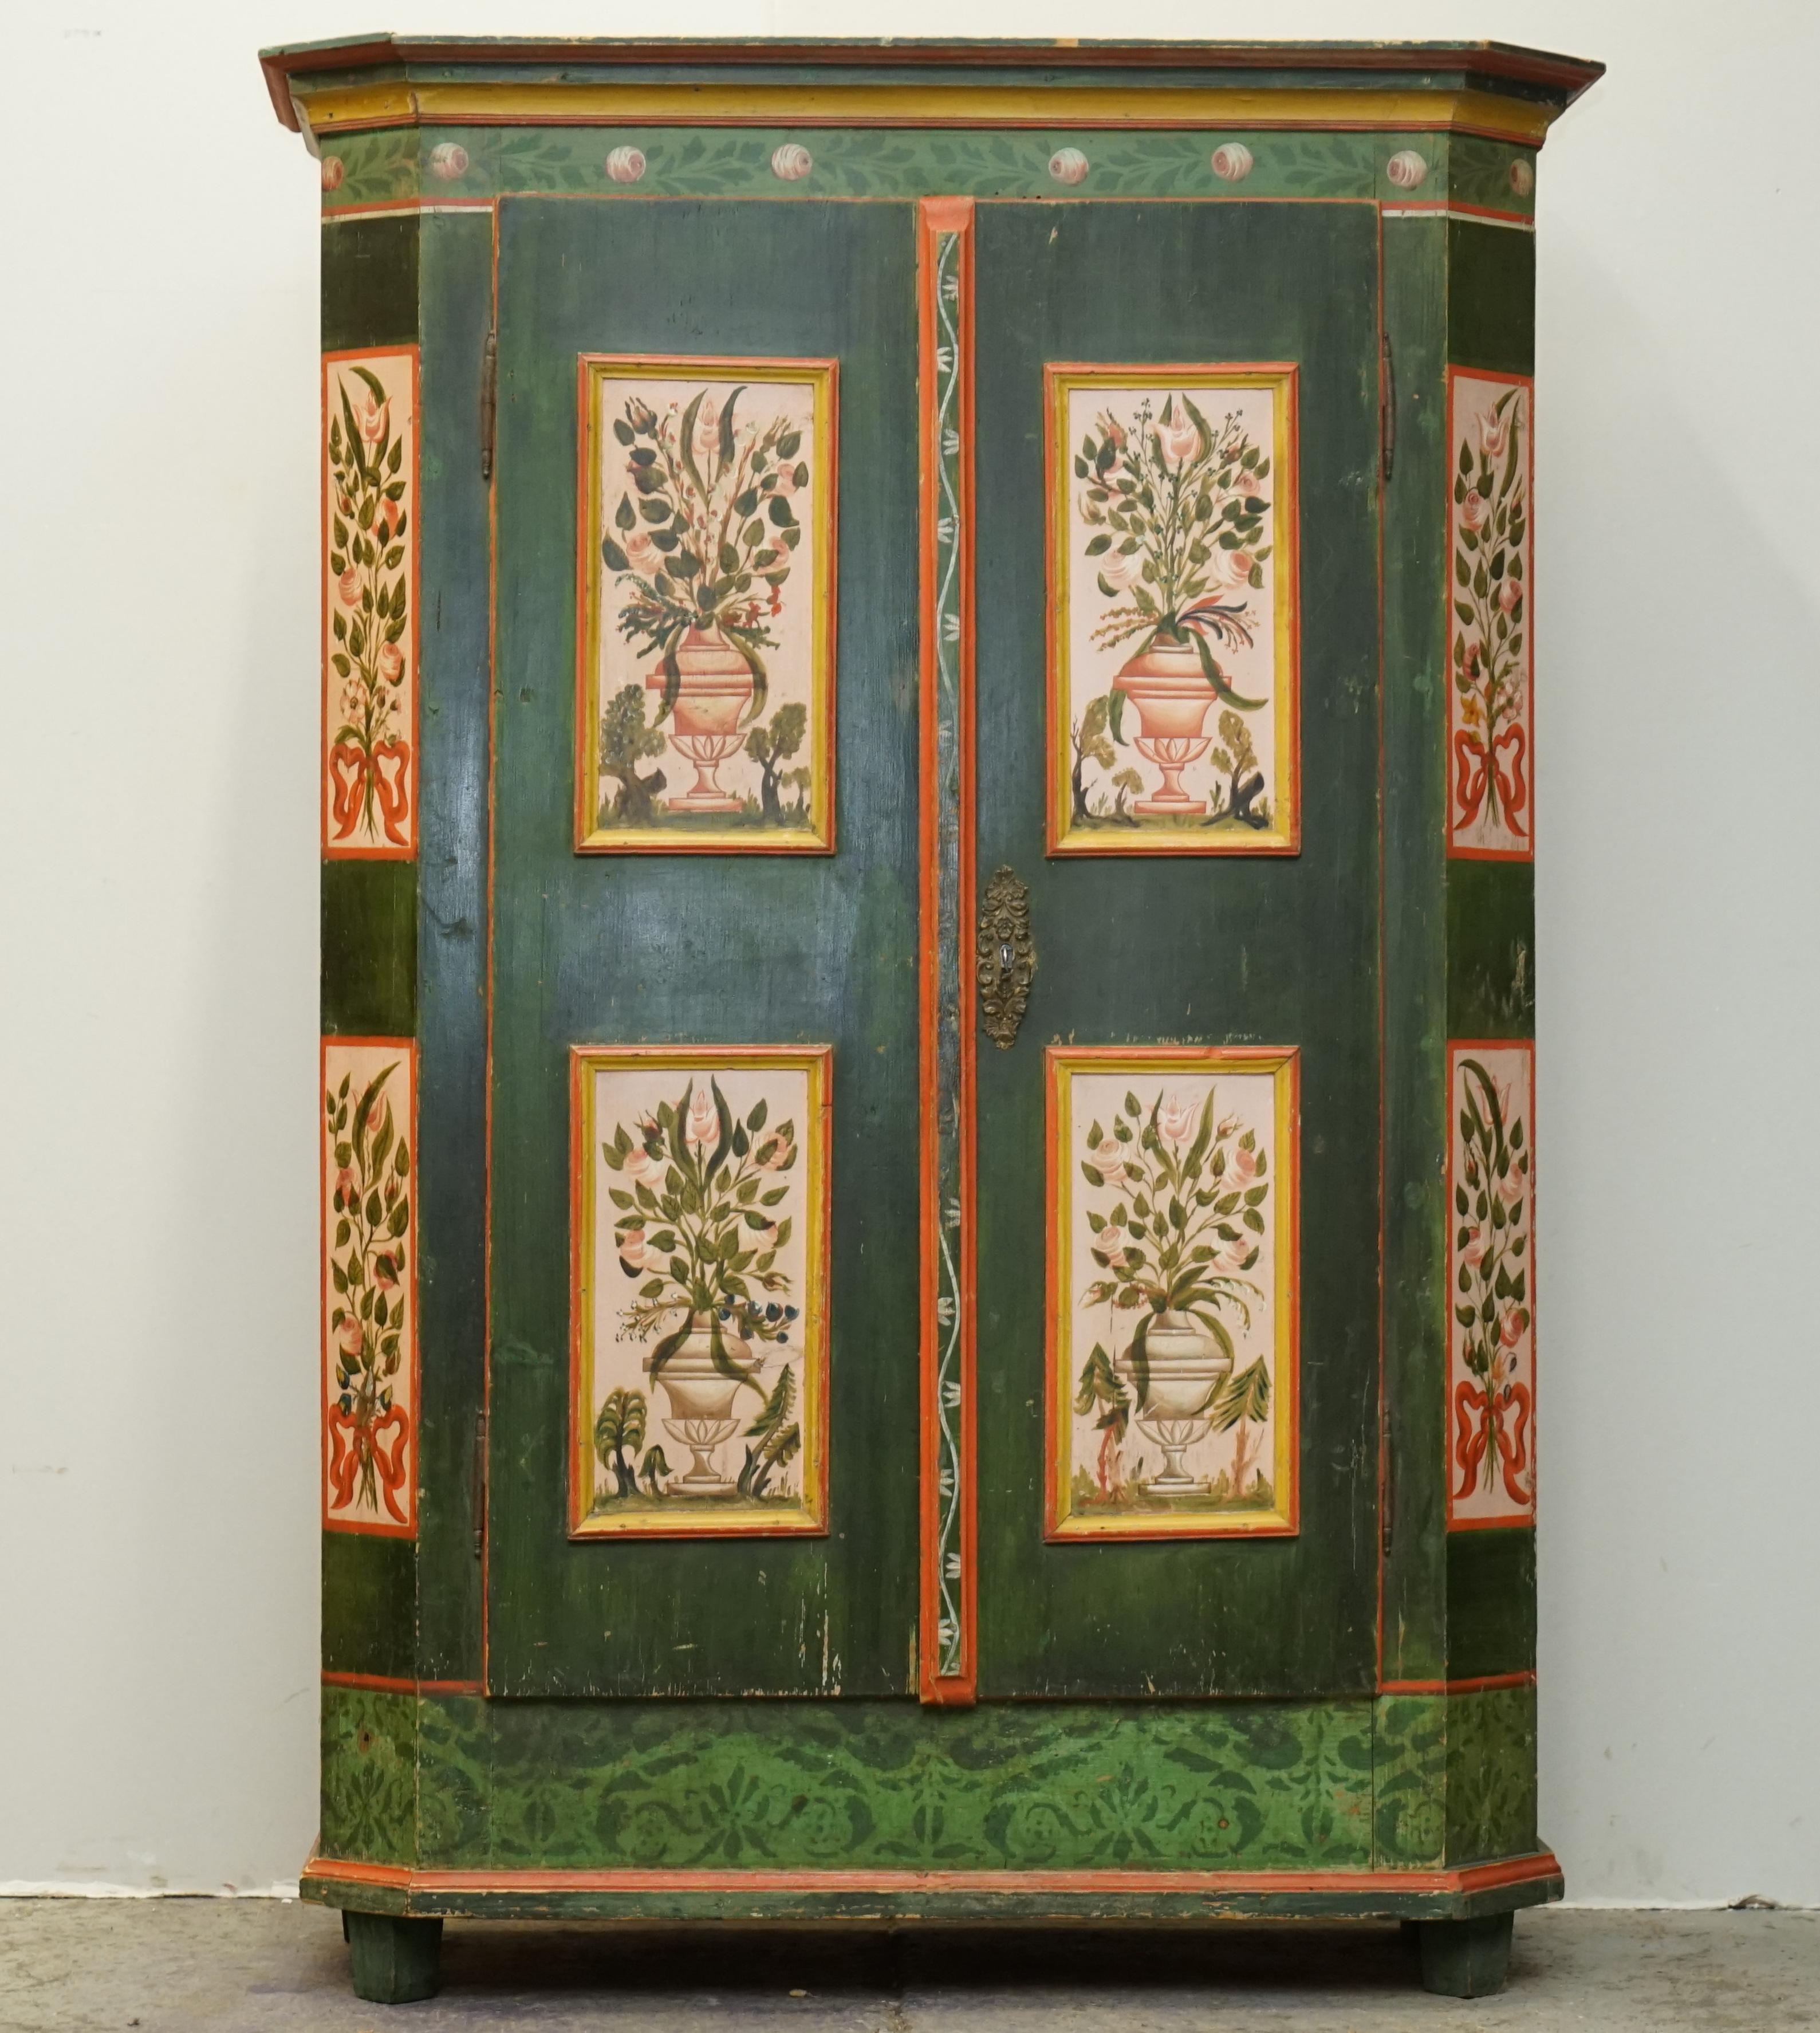 We are delighted to offer for sale this stunning original 1825-1850 Emerald Green painted Antique German Marriage folden linen, wardrobe or pot cupboard with rose head detailing.

I have recently purchased a very large collection of these